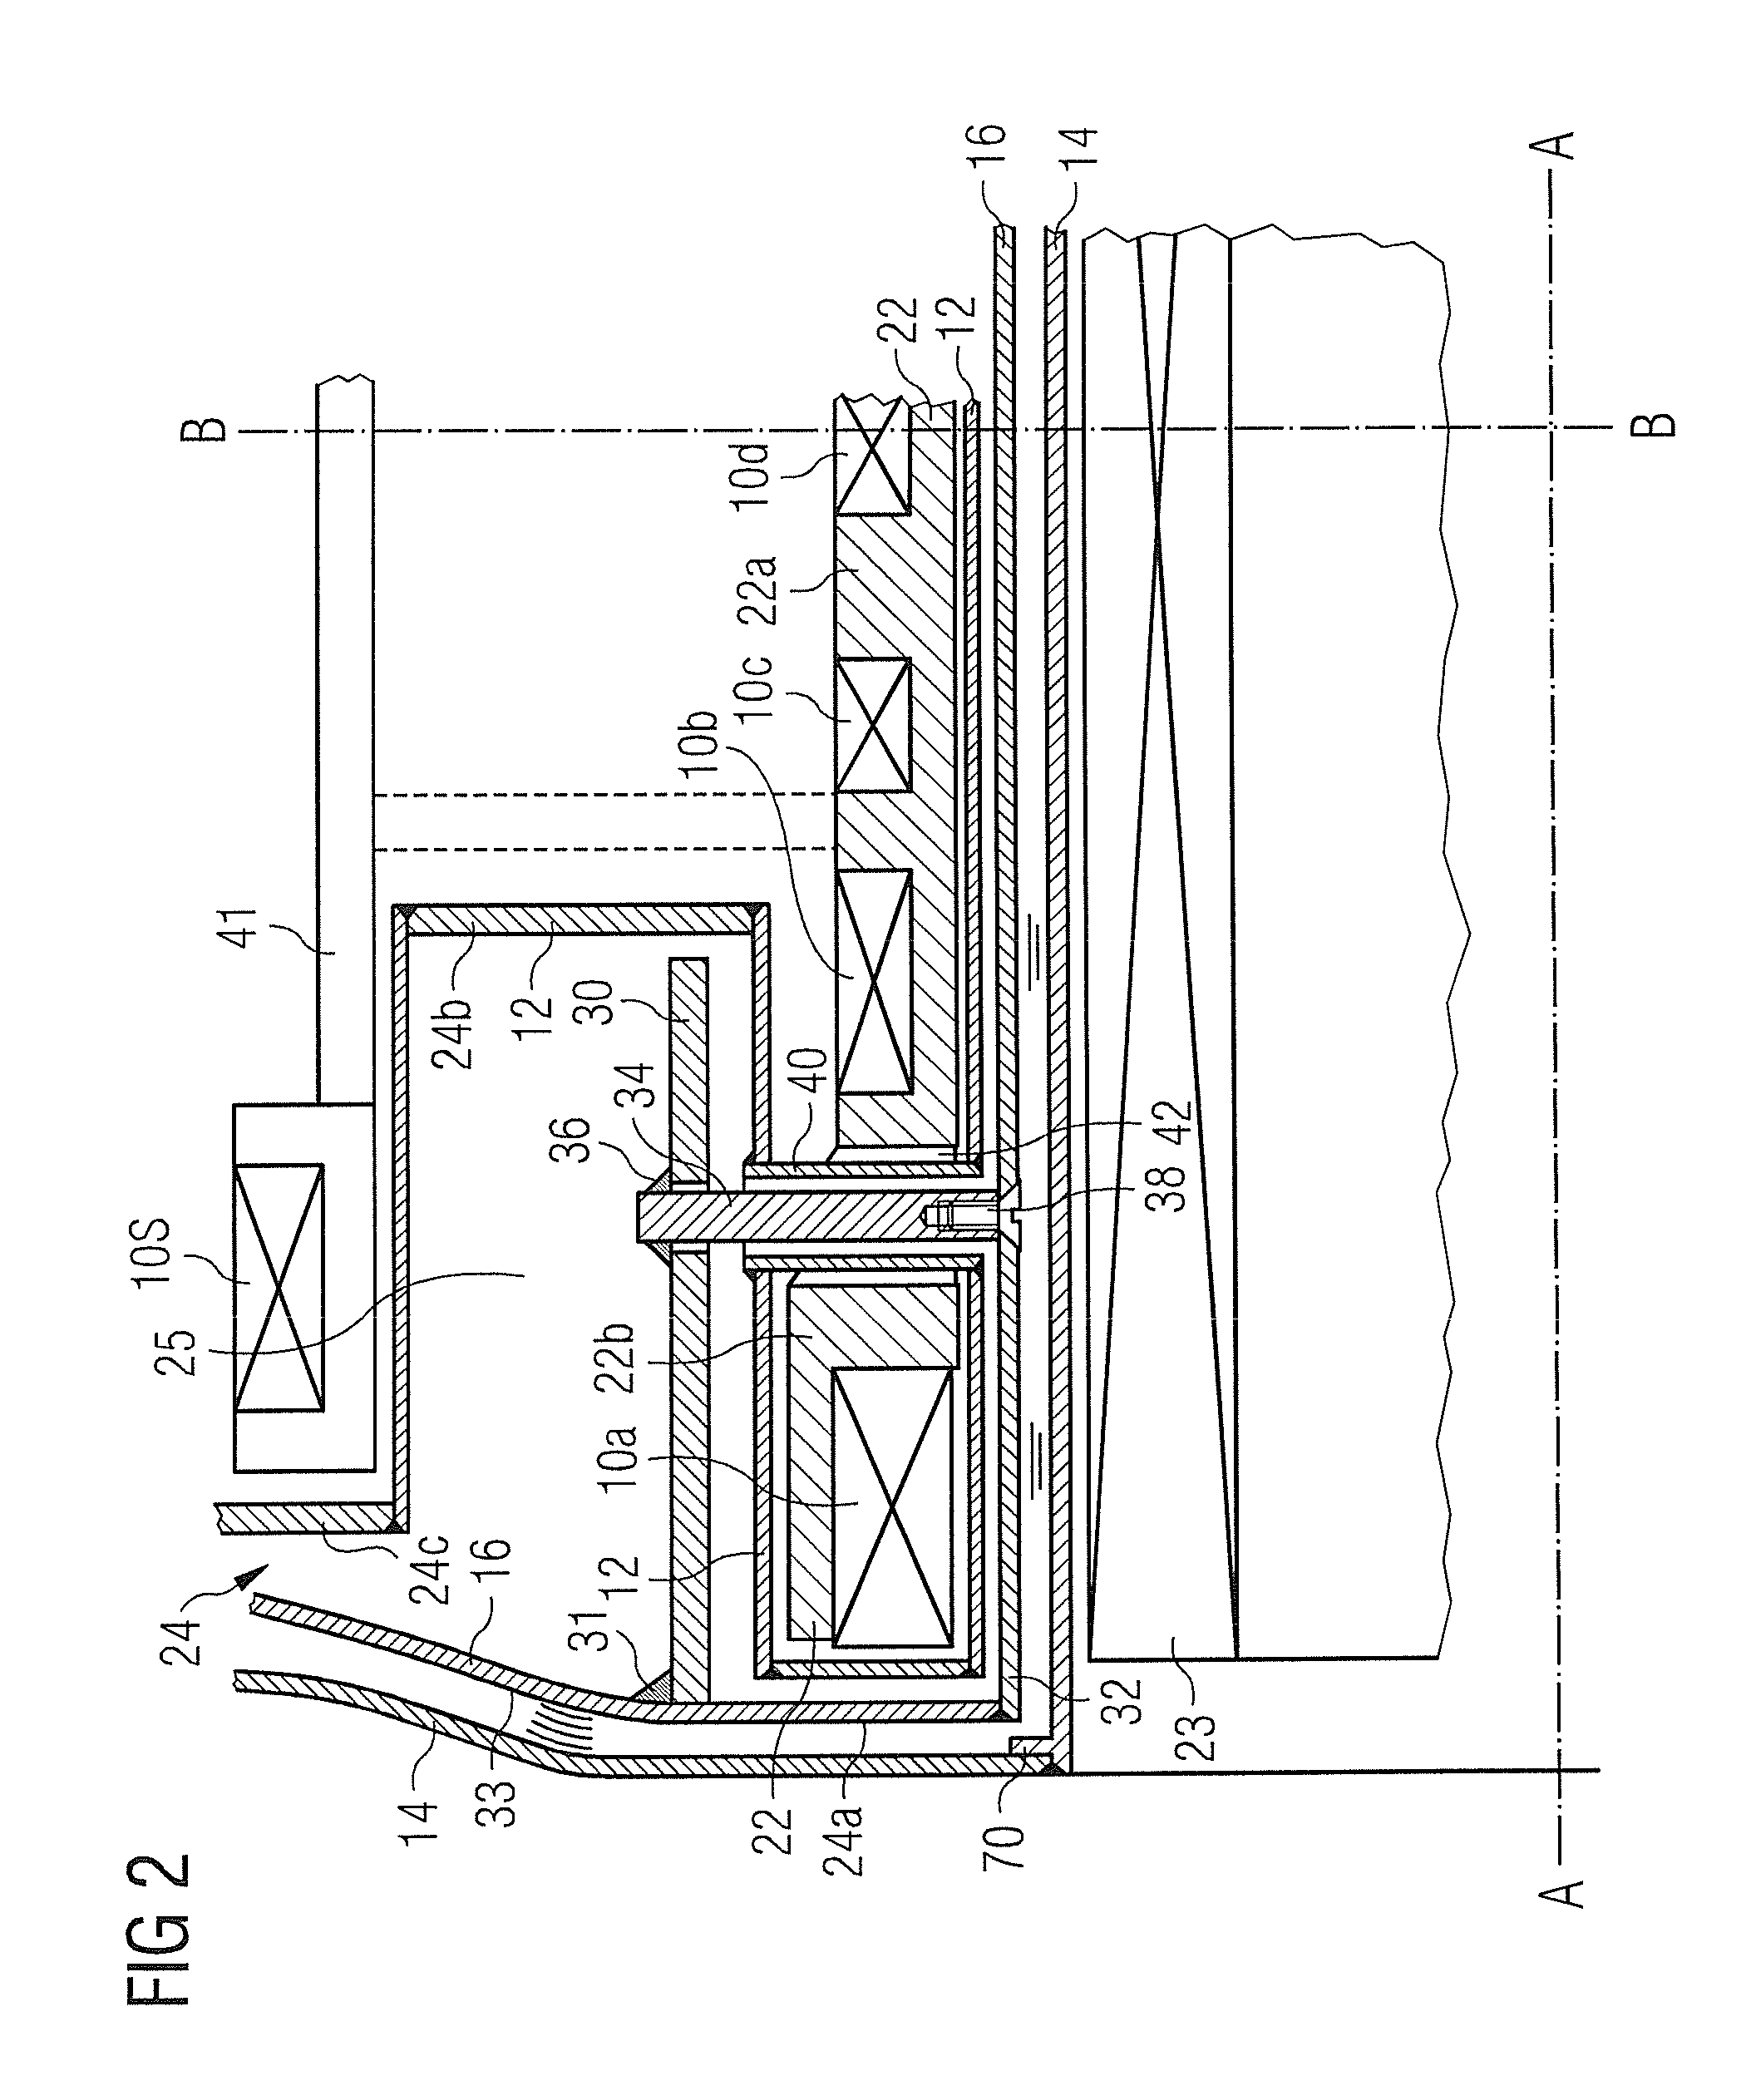 Hollow cylindrical thermal shield for a tubular cryogenically cooled superconducting magnet